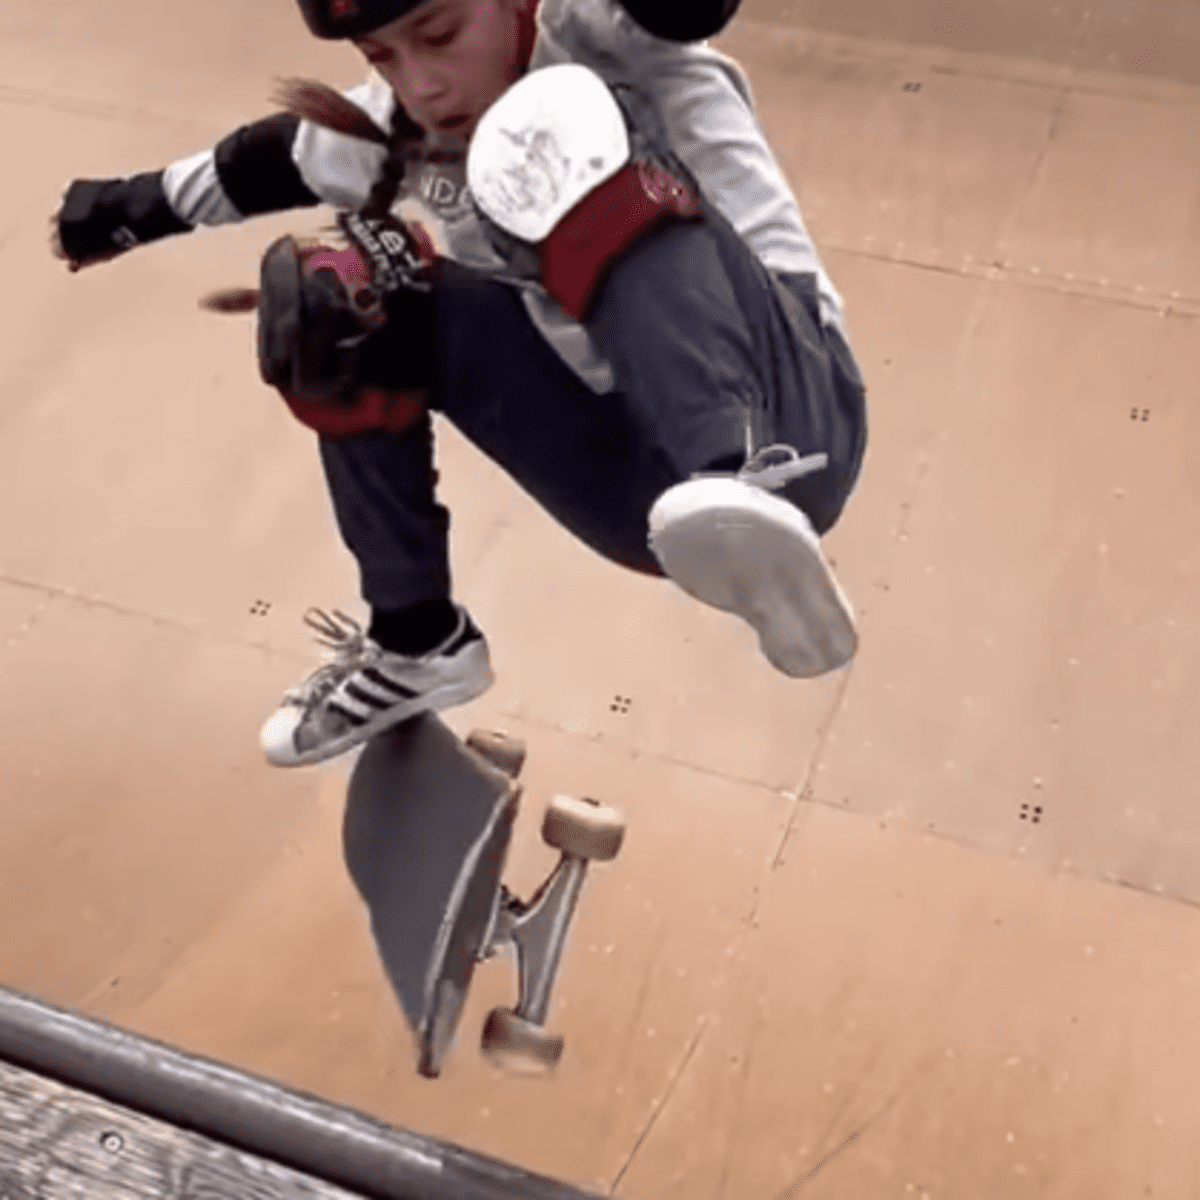 10-year-old Canadian skateboarding phenom Reese Nelson to compete at X Games